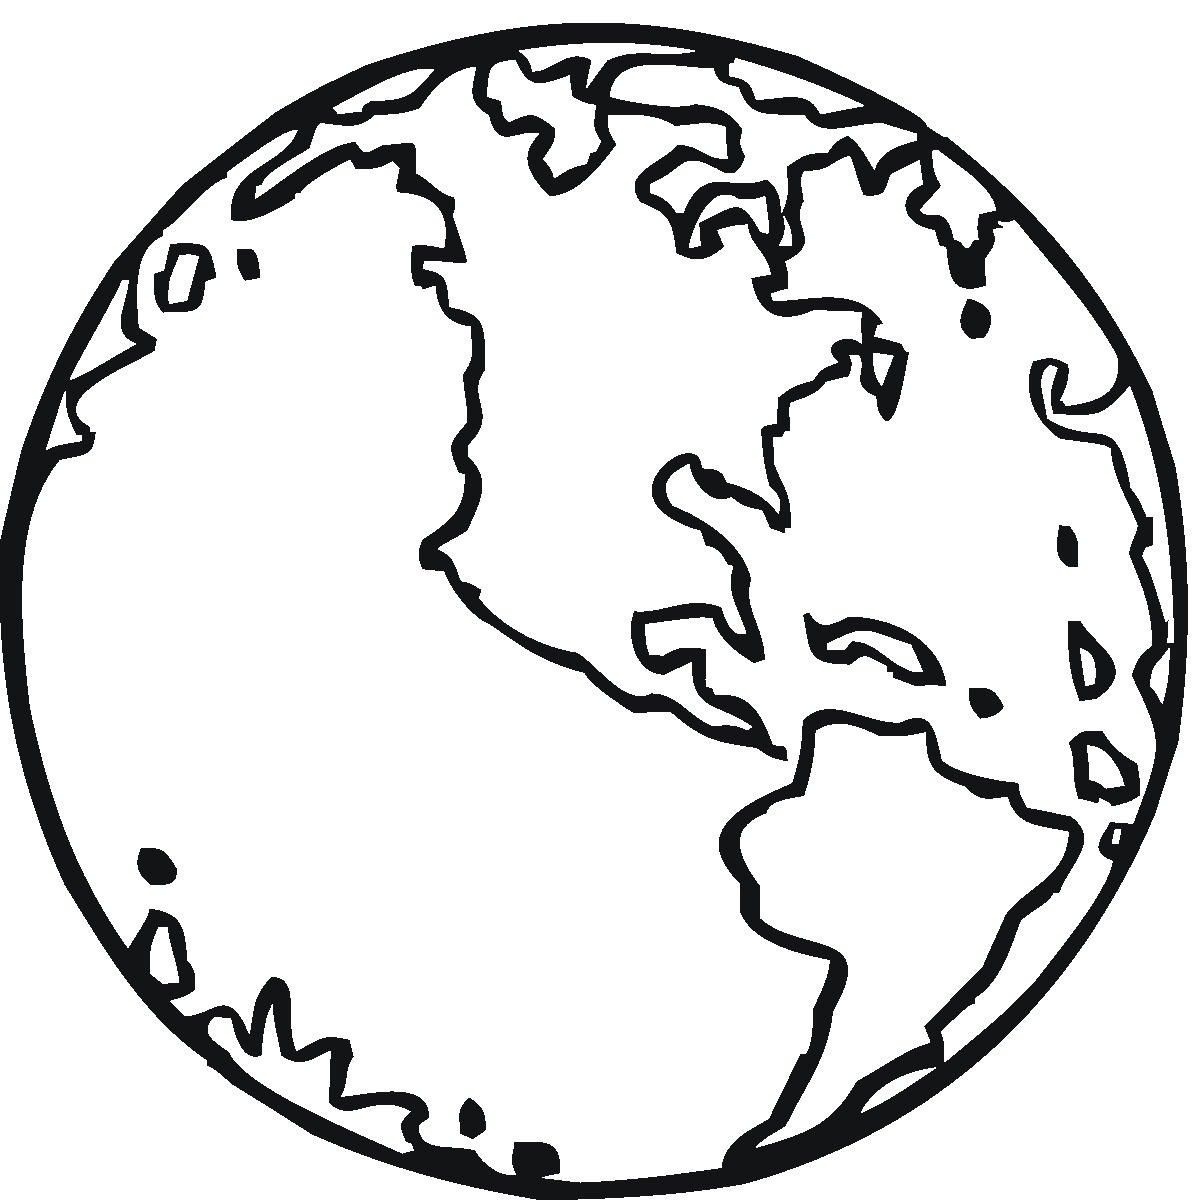 Free Printable Earth Coloring Pages For Kids | Stuff | Earth - Earth Coloring Pages Free Printable